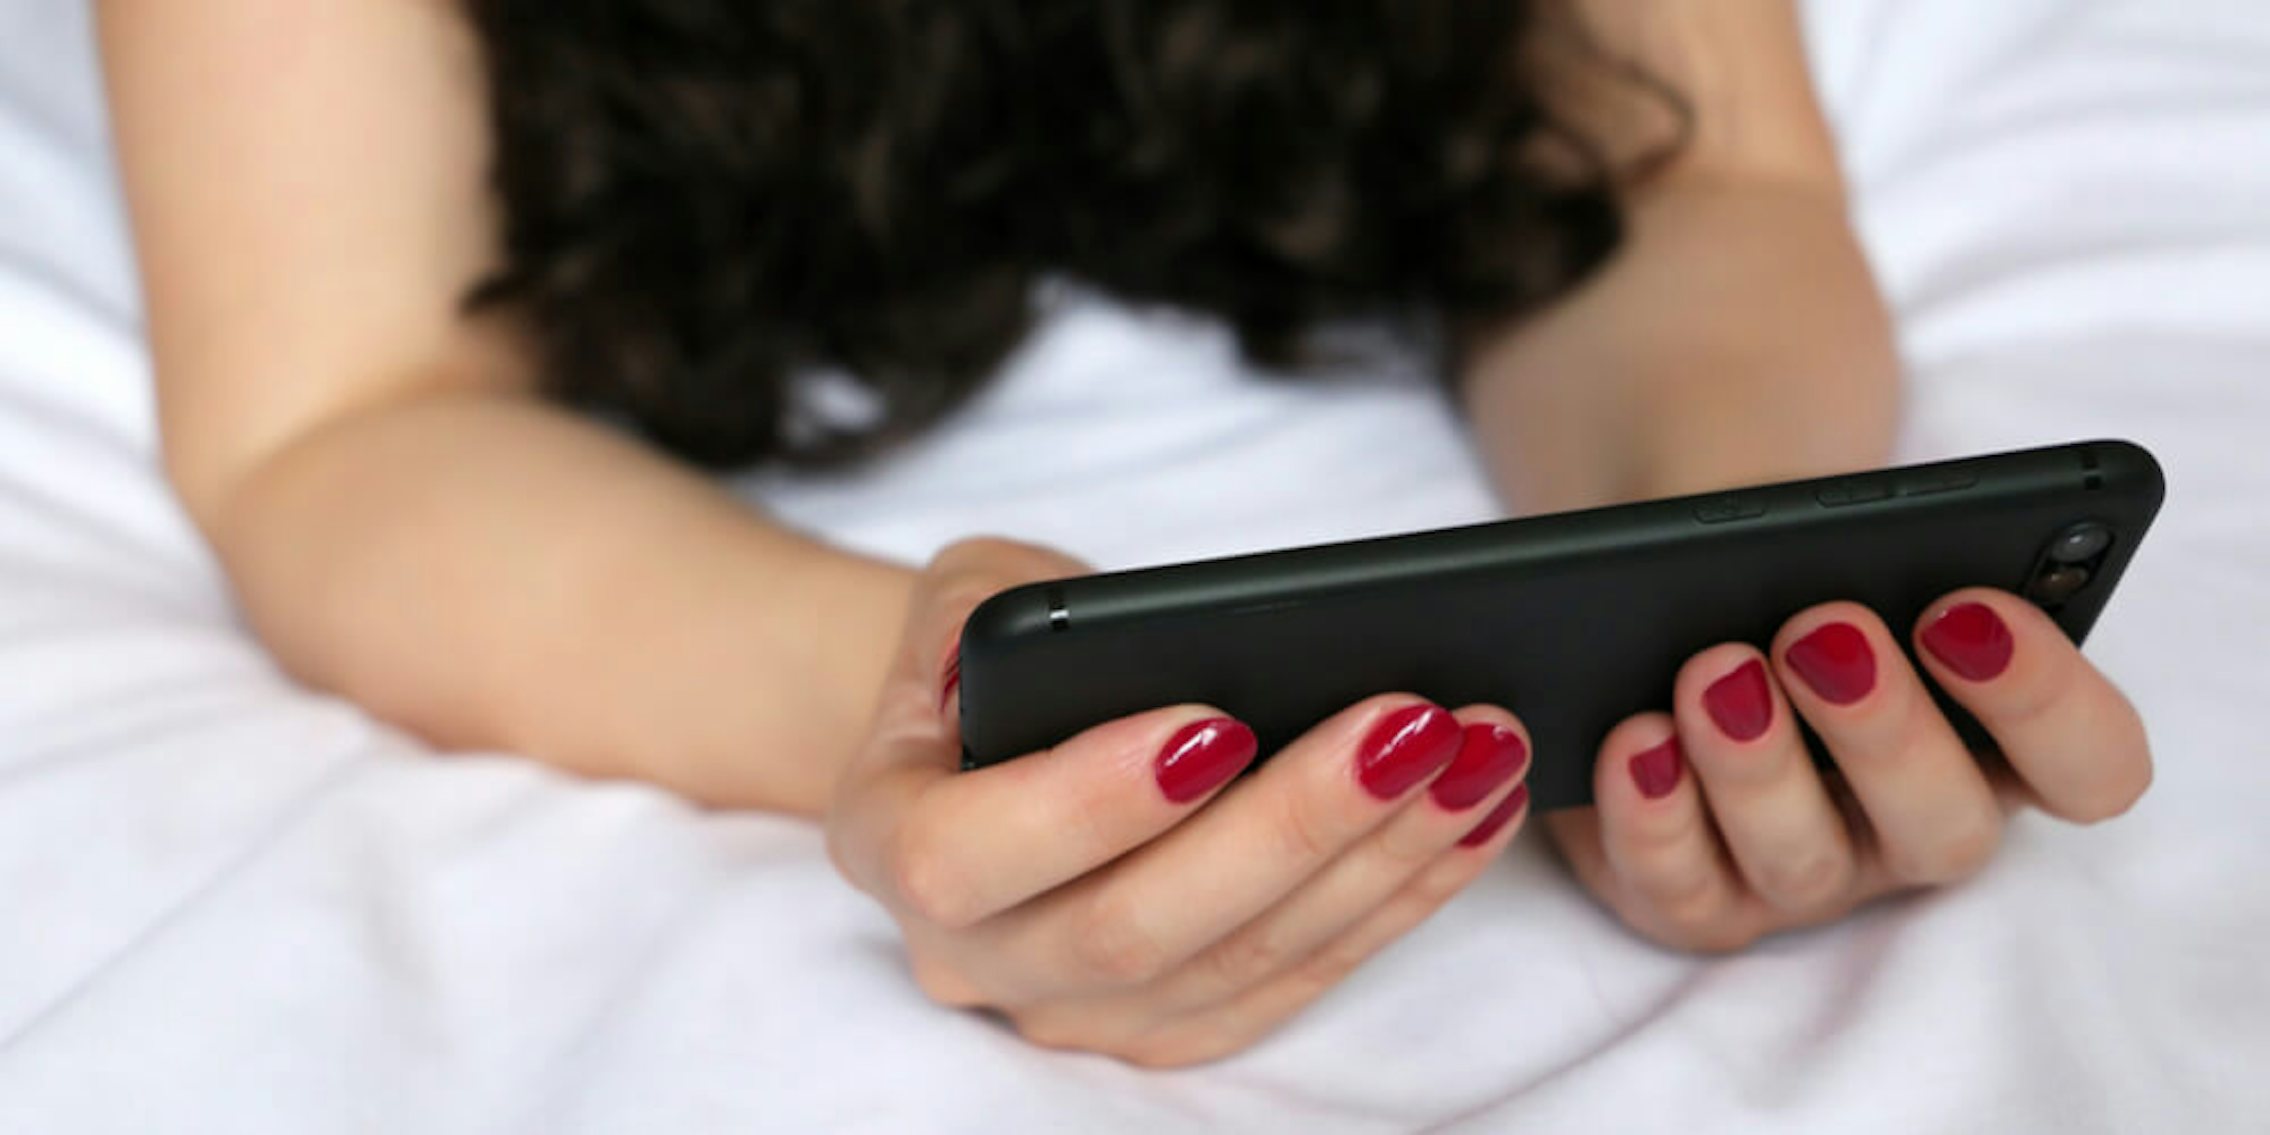 Mobile Exhamstrer - Android and iPhone Users Like Totally Different Porn, xHamster Finds